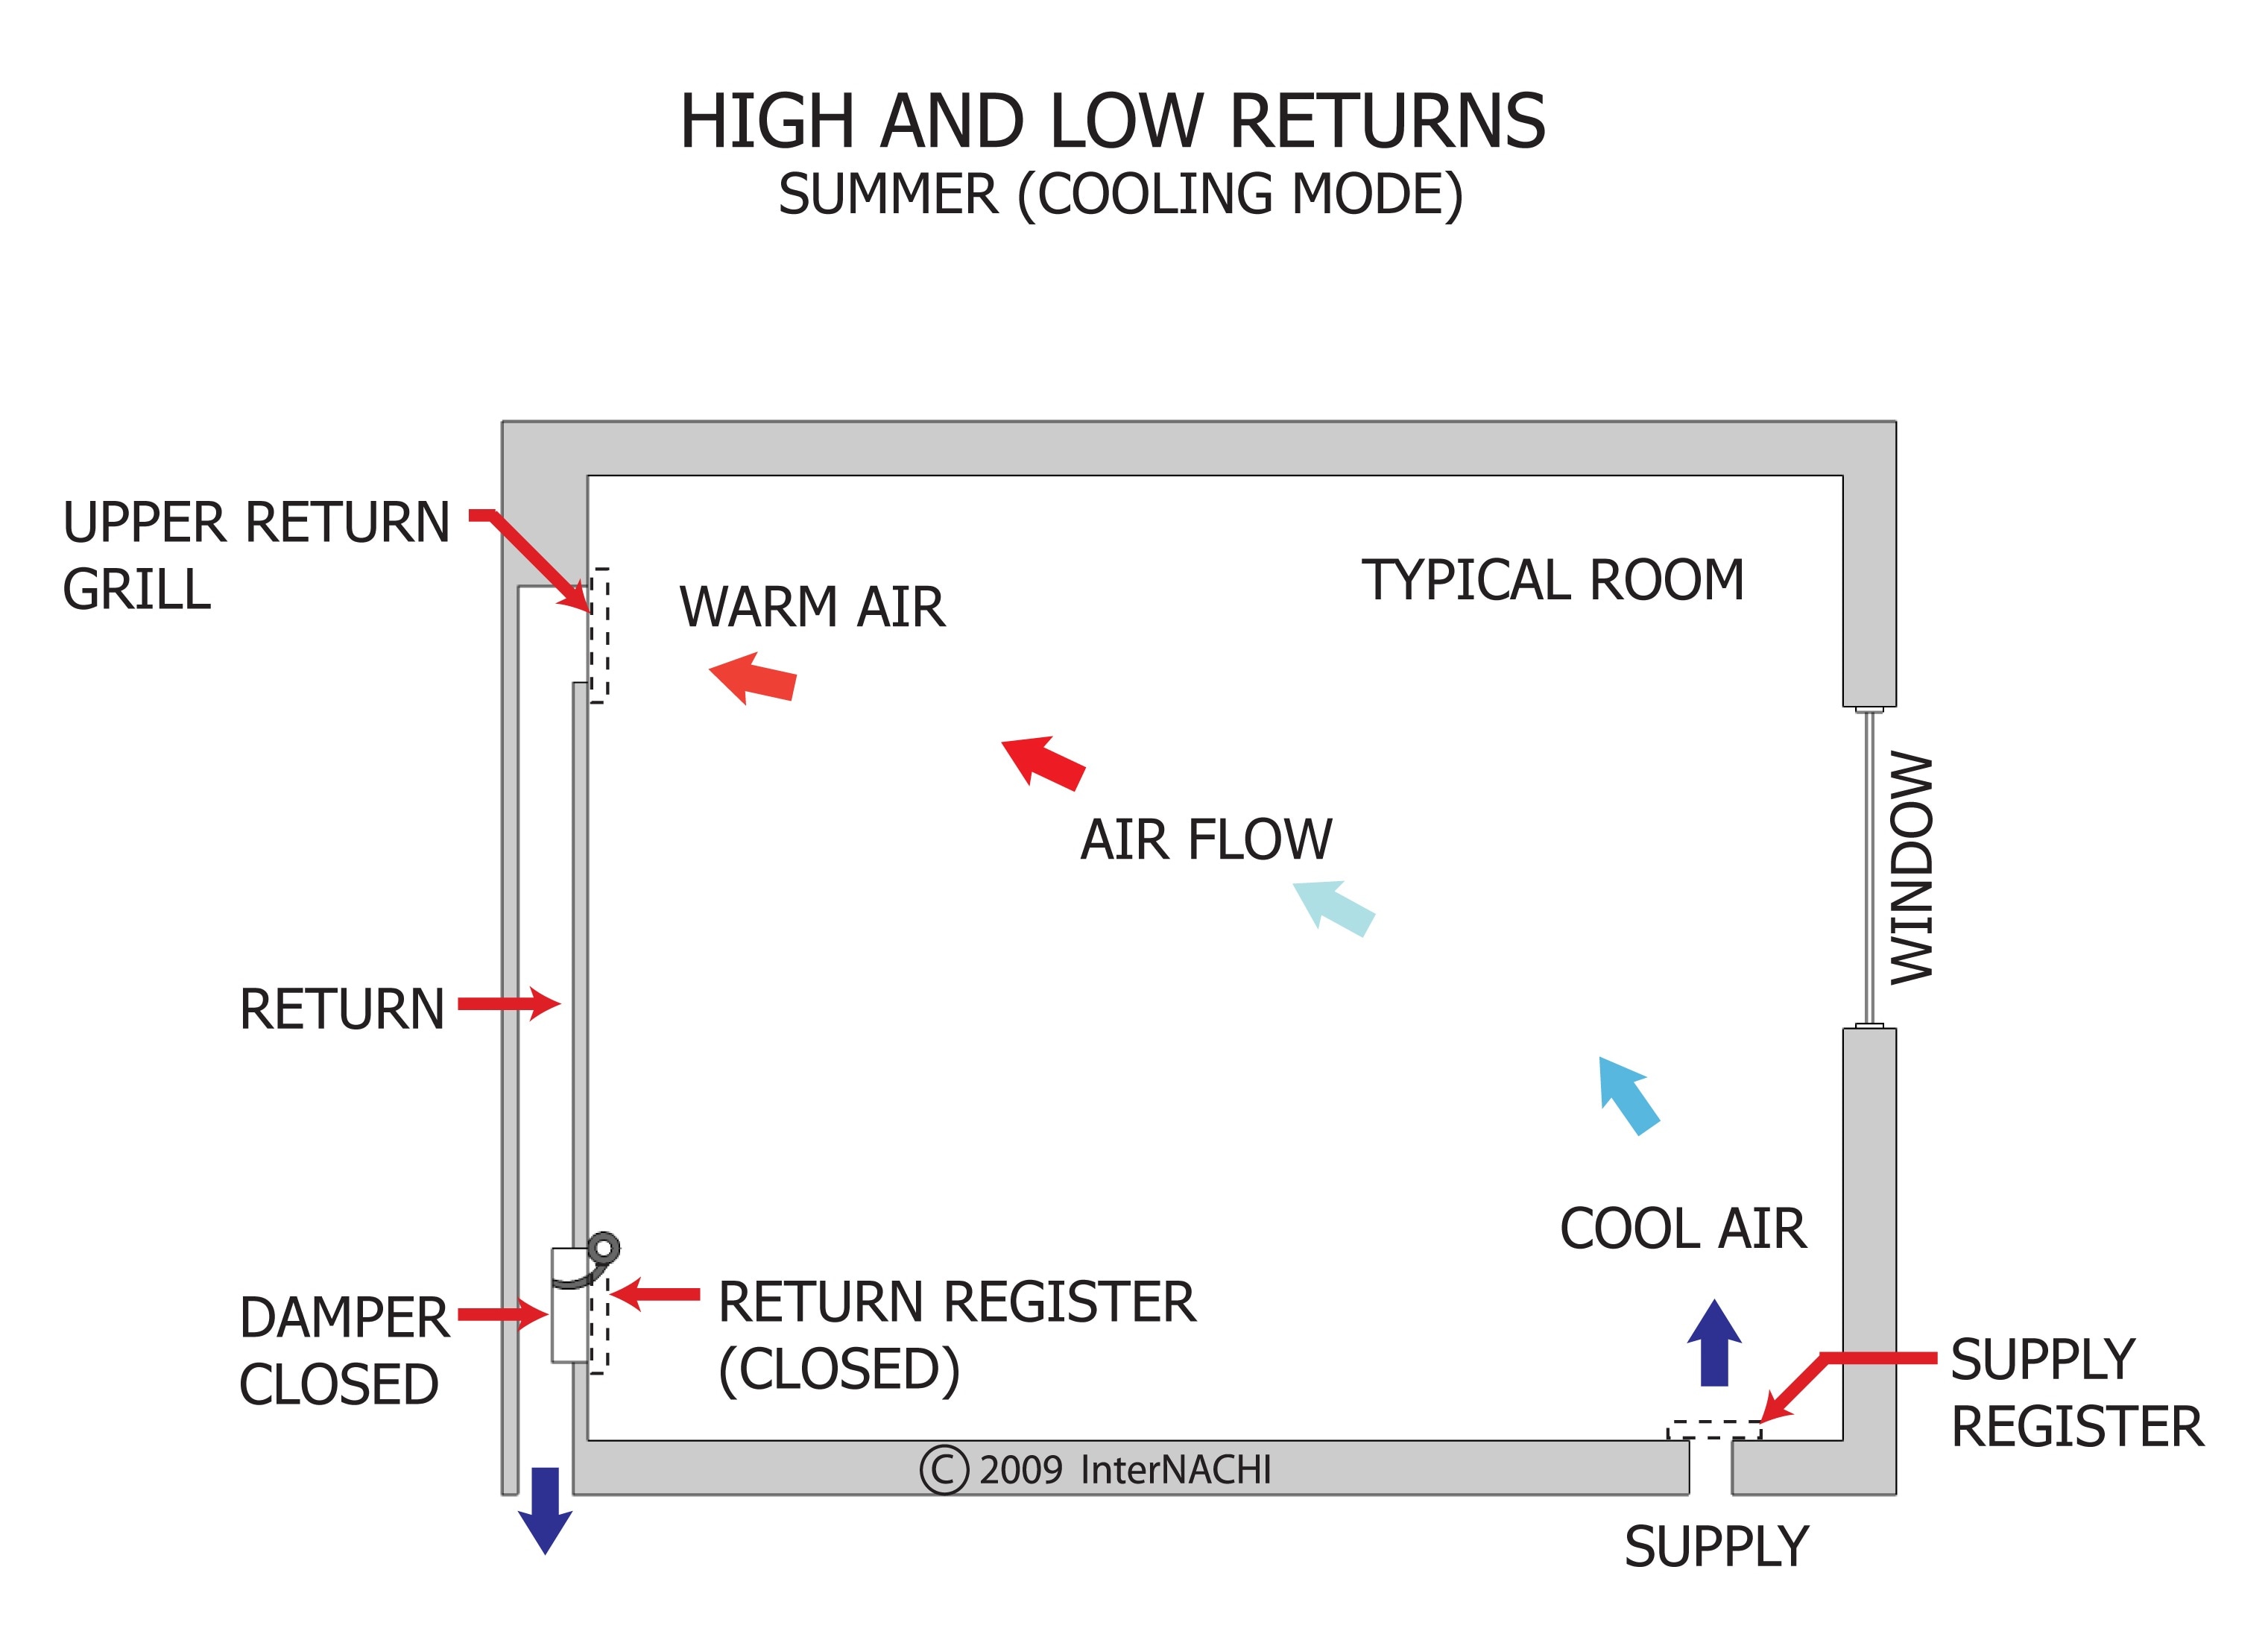 Continuous supply and return air grille in an ICU